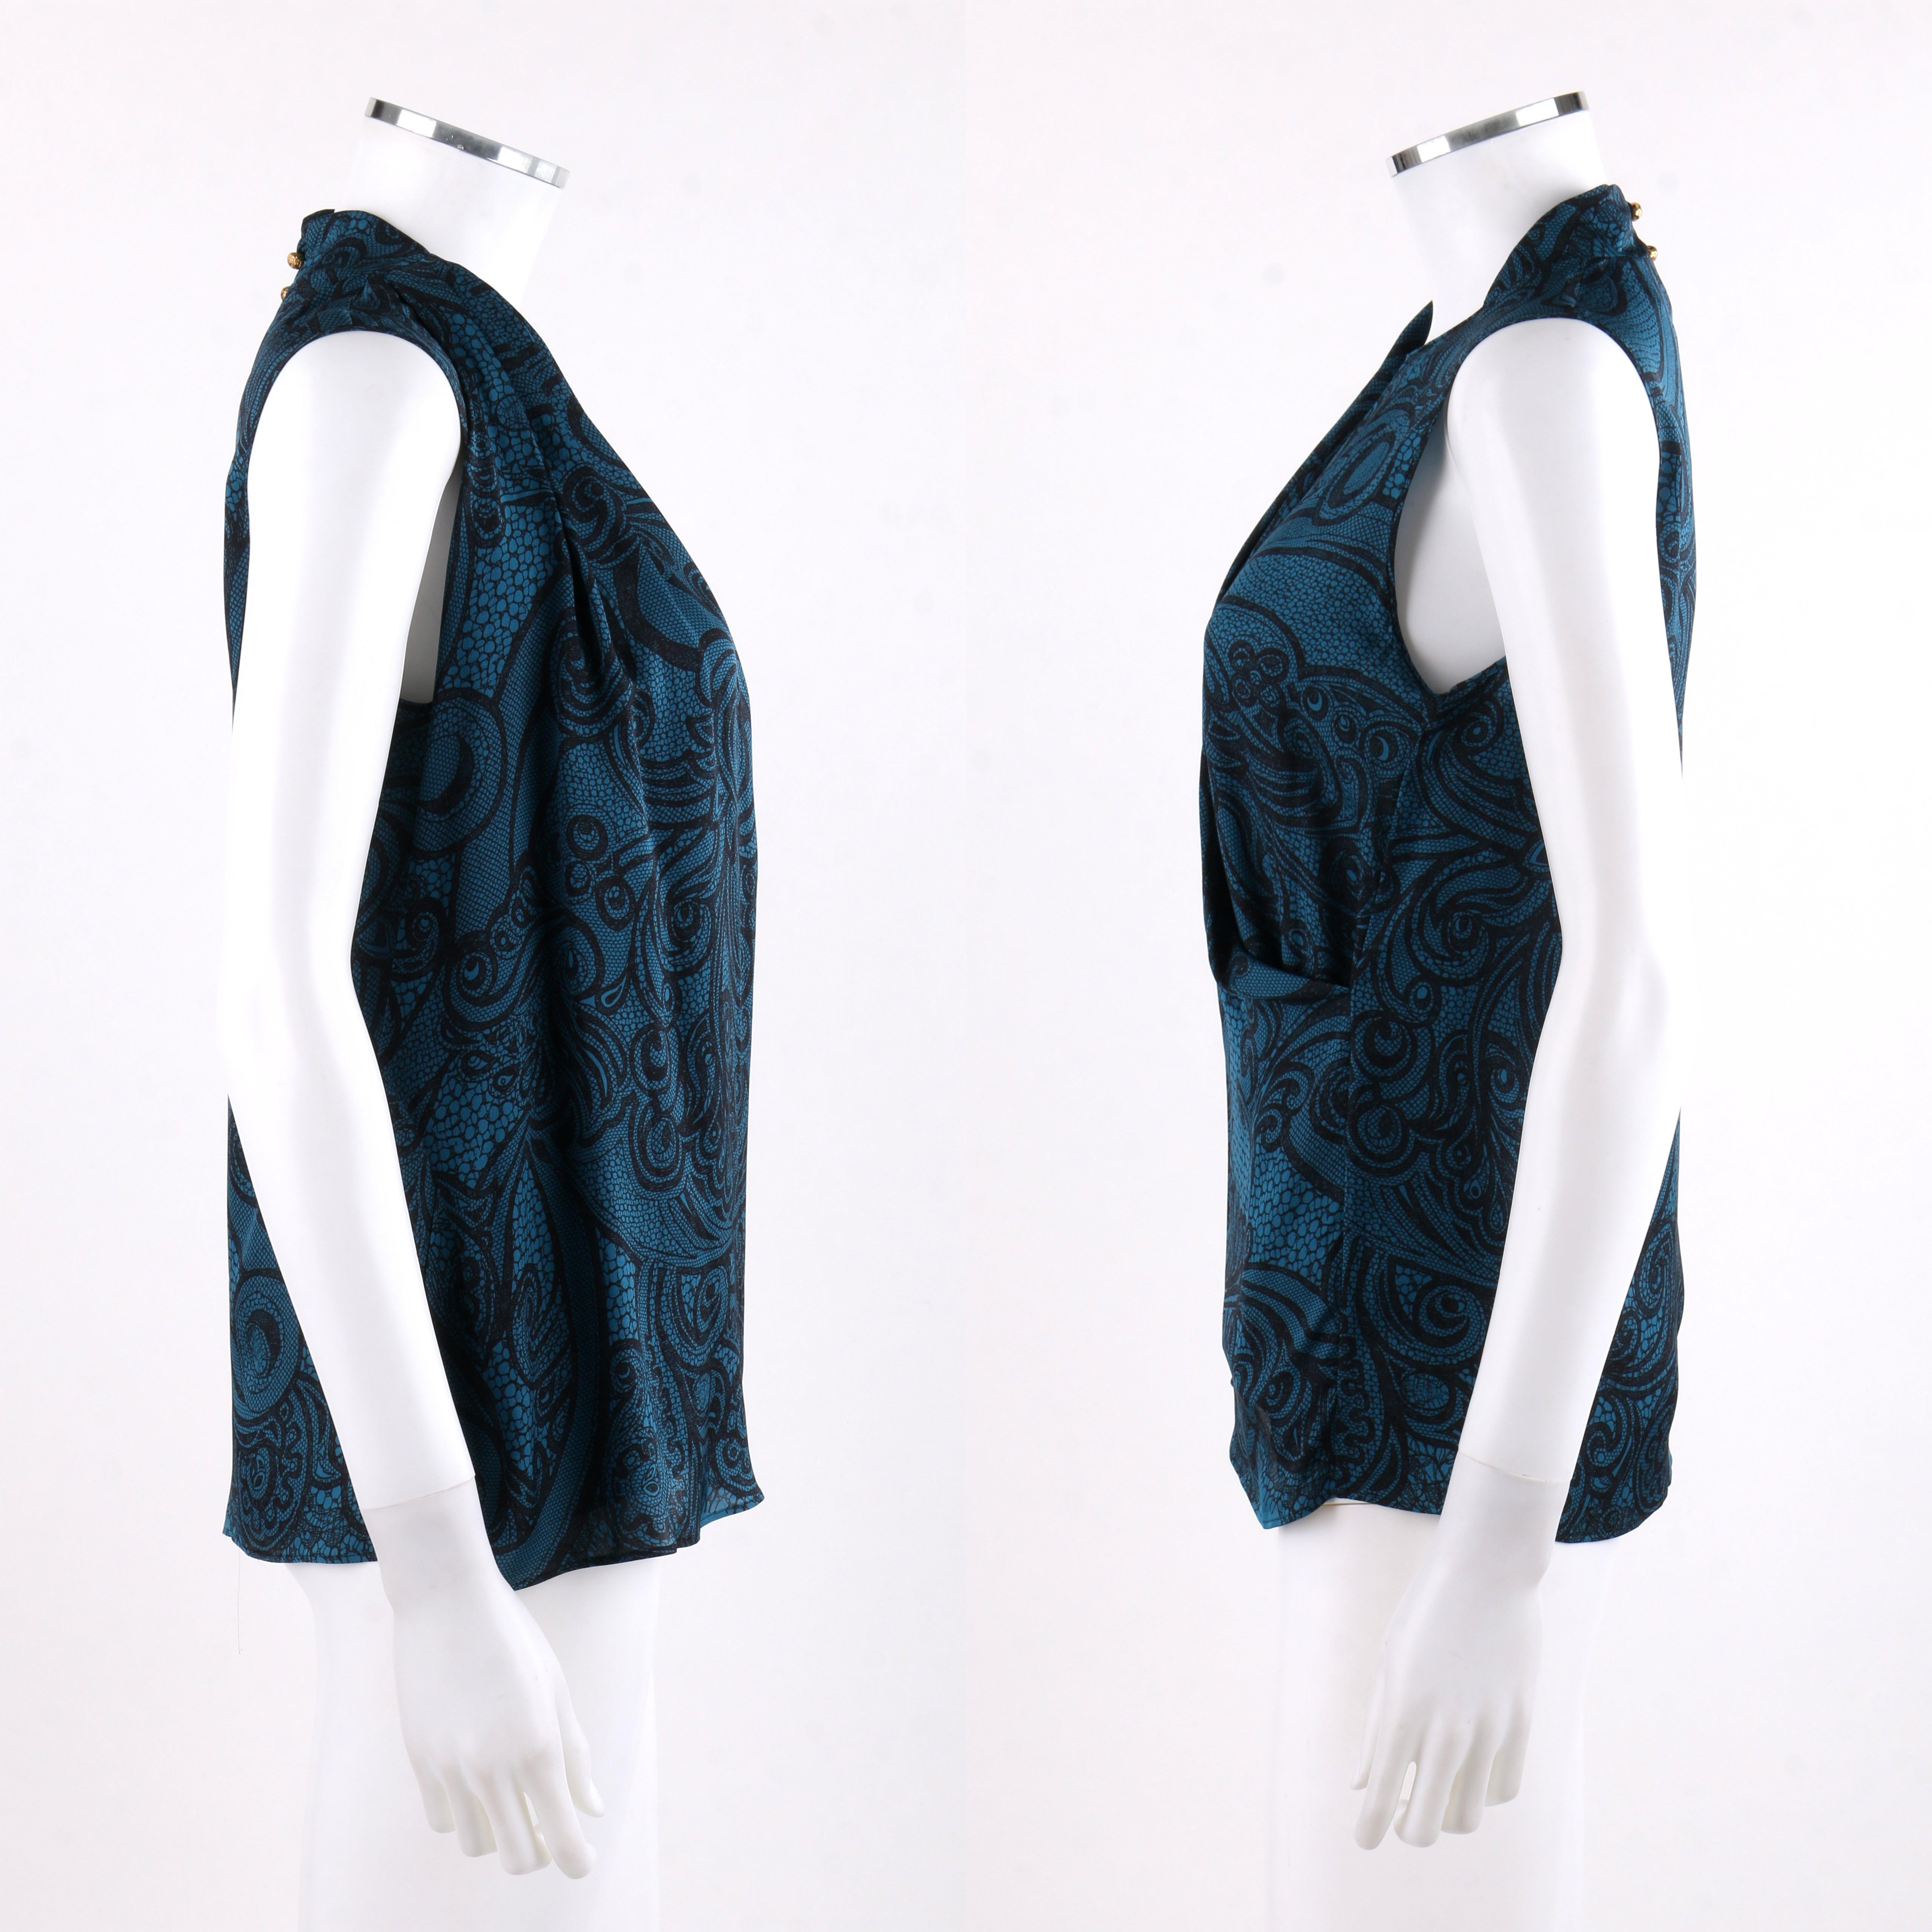 EMILIO PUCCI Teal Black Lace Print Sleeveless Silk Wrap Style Blouse Scarf Belt In Good Condition For Sale In Thiensville, WI